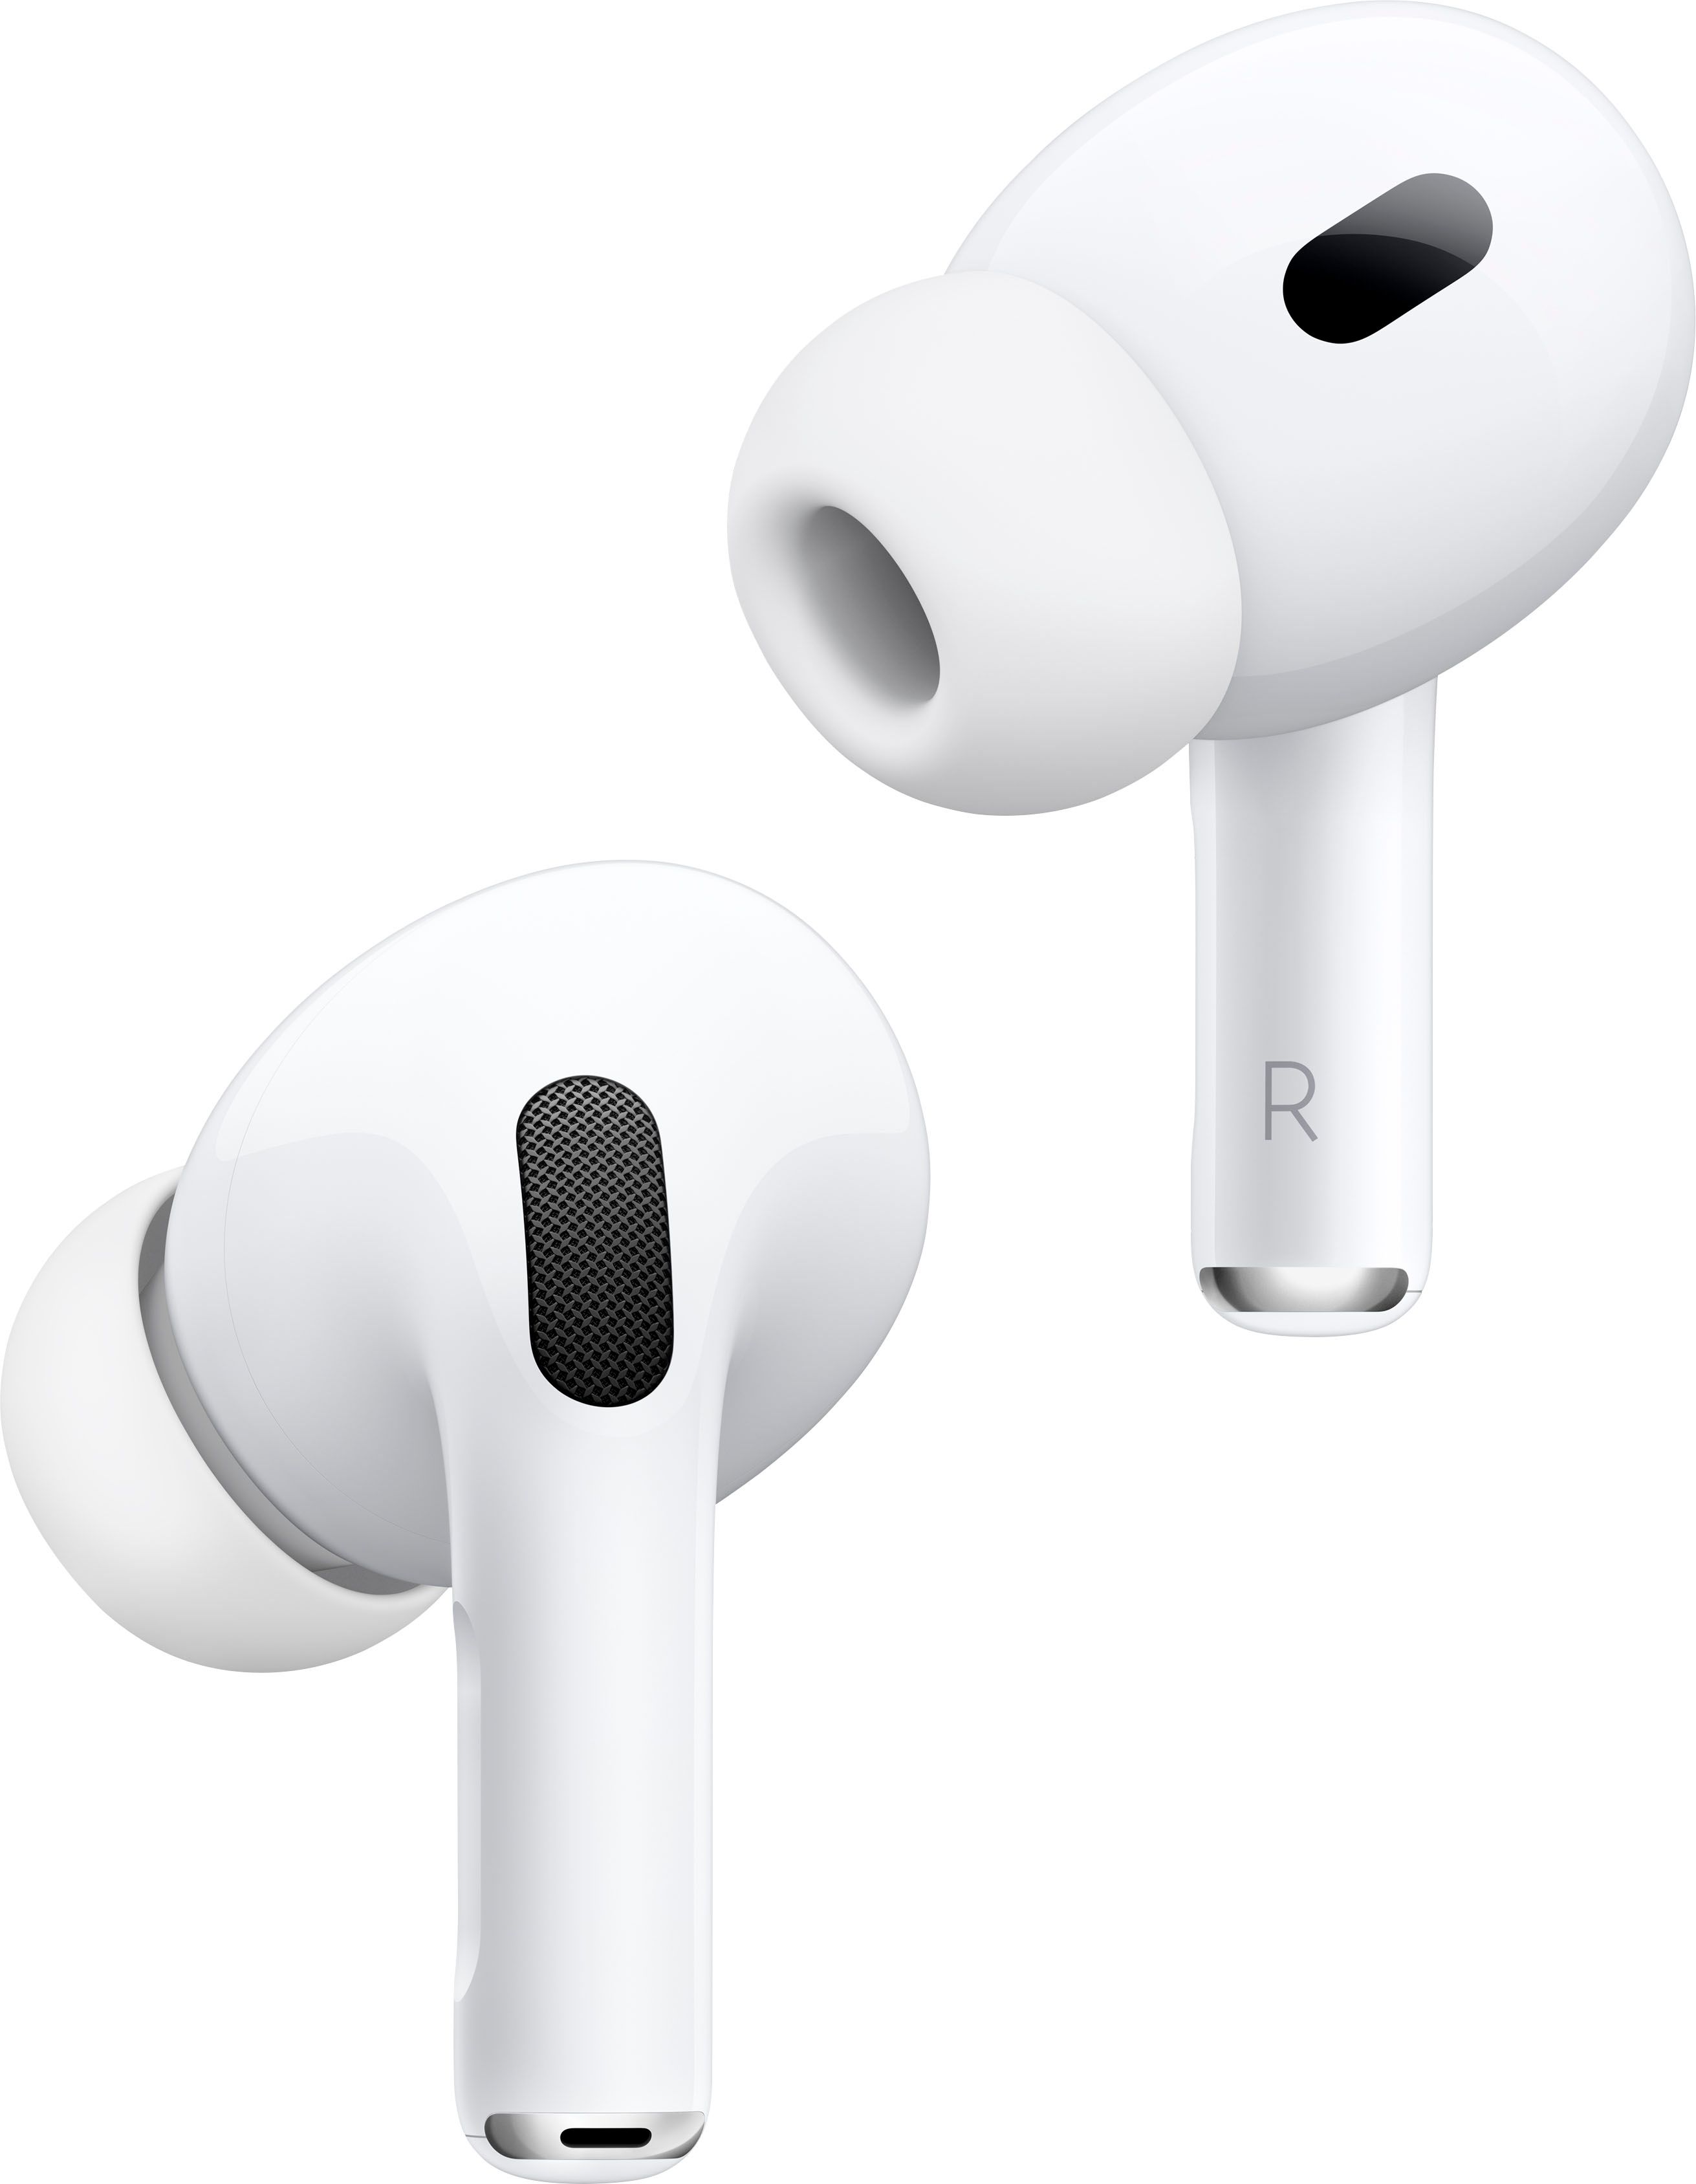 Apple AirPods Pro (2nd generation) White MQD83AM/A - Best Buy | Best Buy U.S.